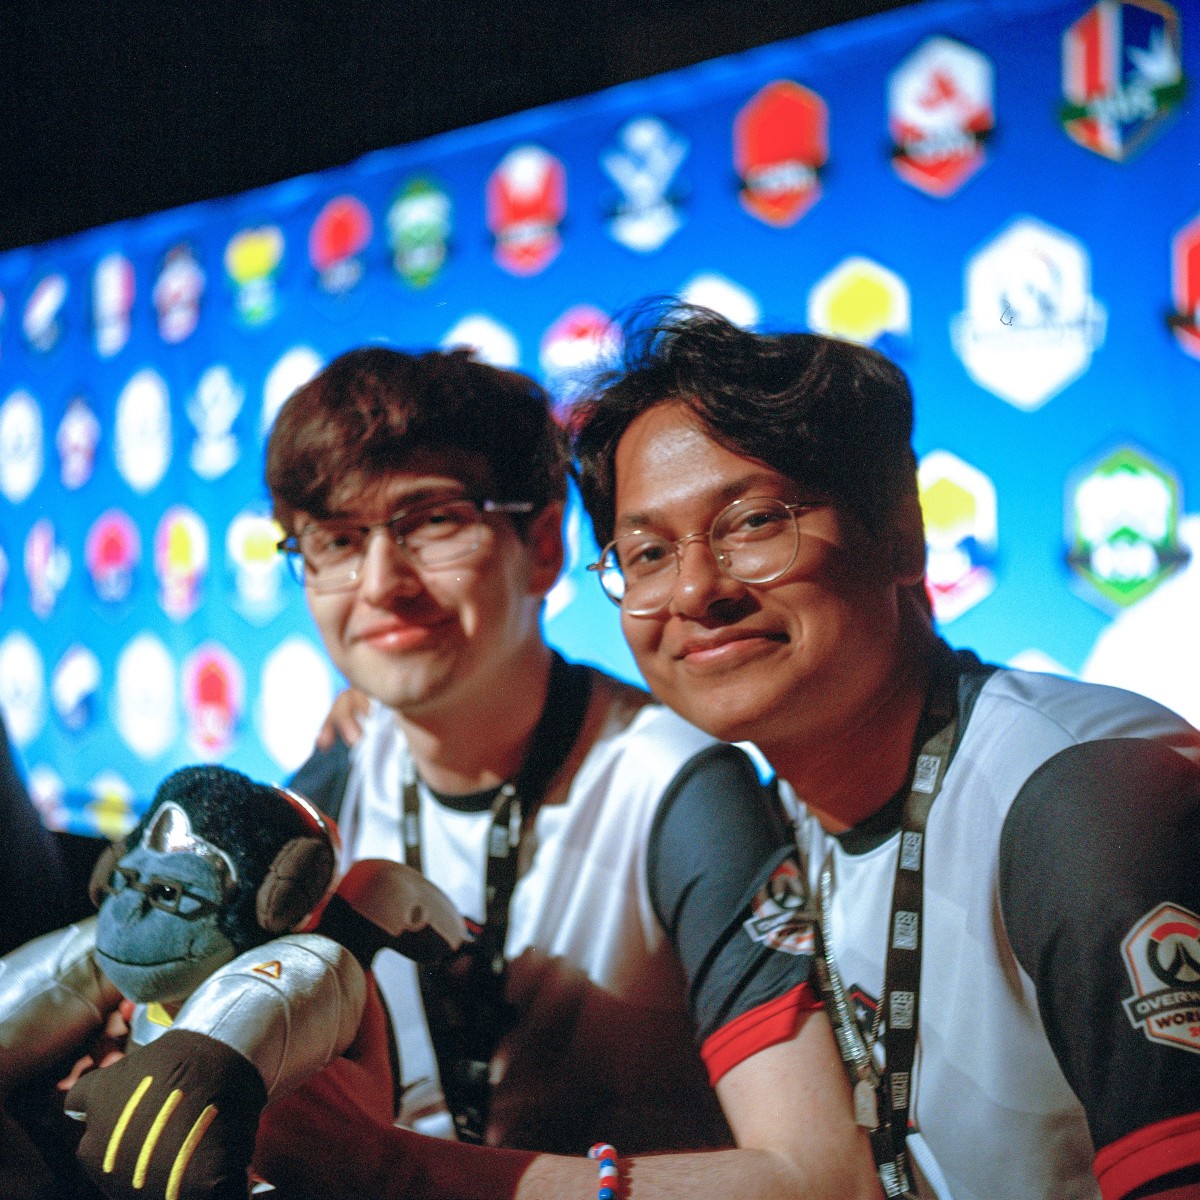 Team USA smile for the camera at the Overwatch World Cup